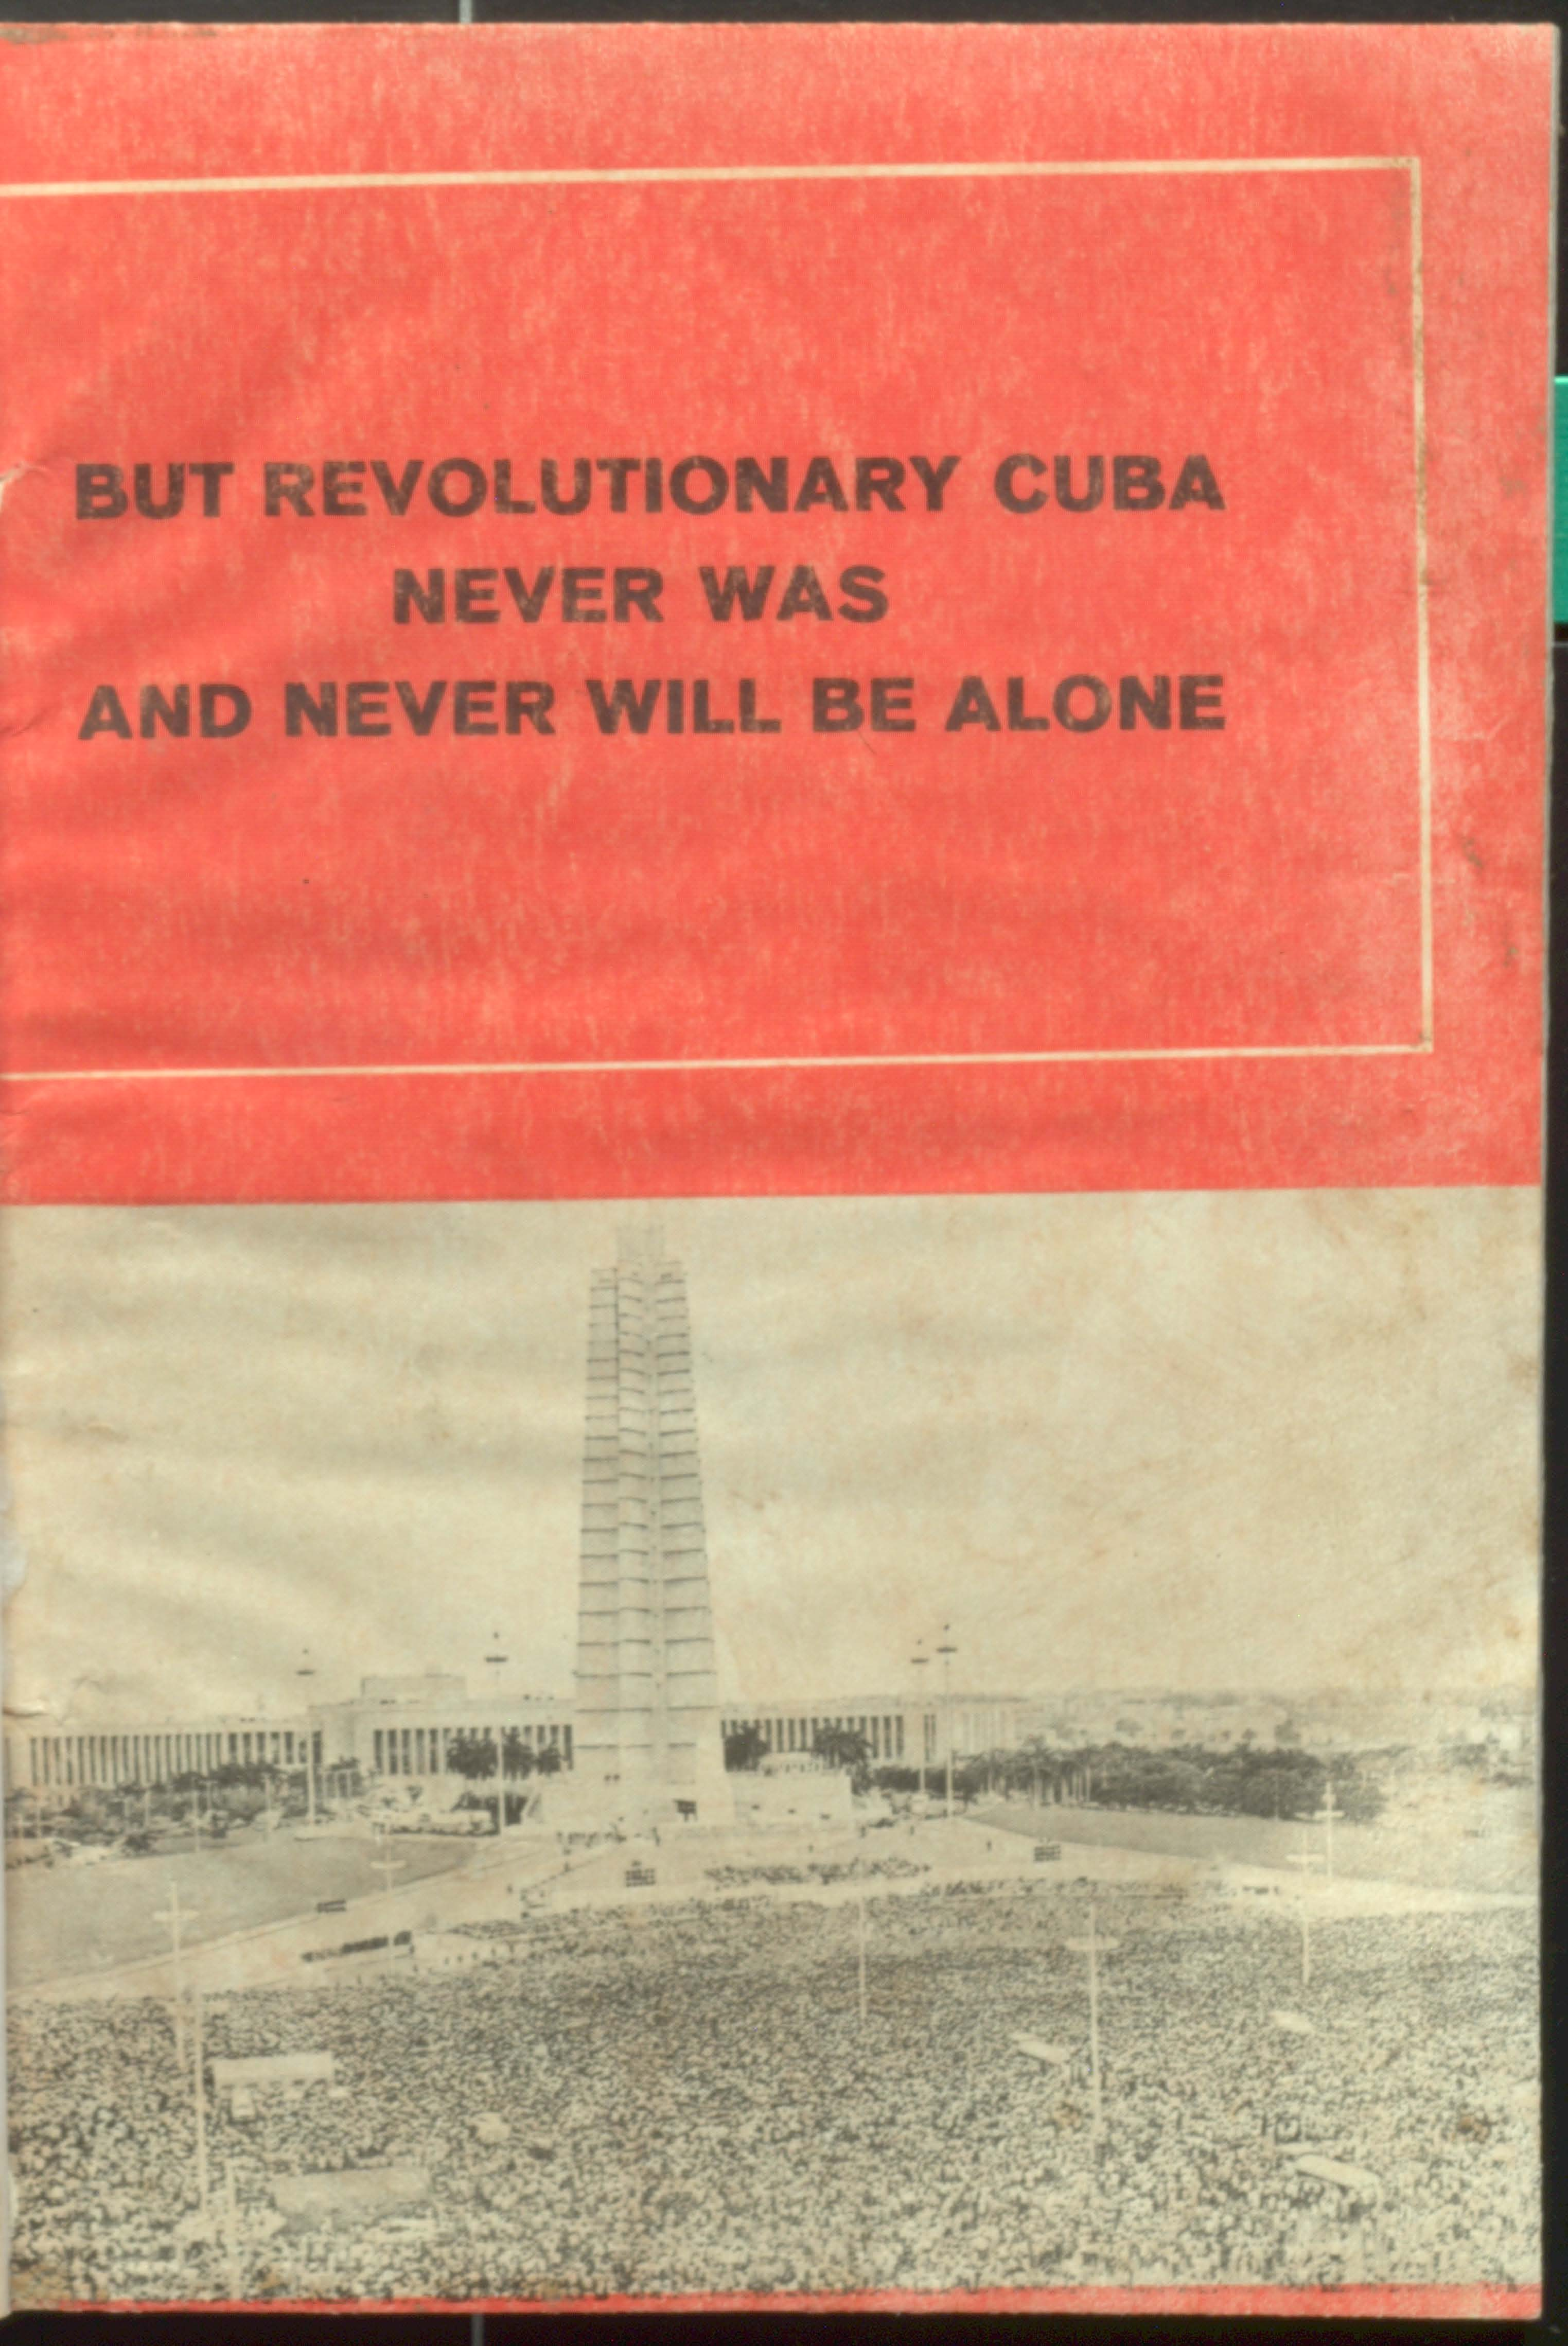 But Revolutionary Cuba never was and will be alone